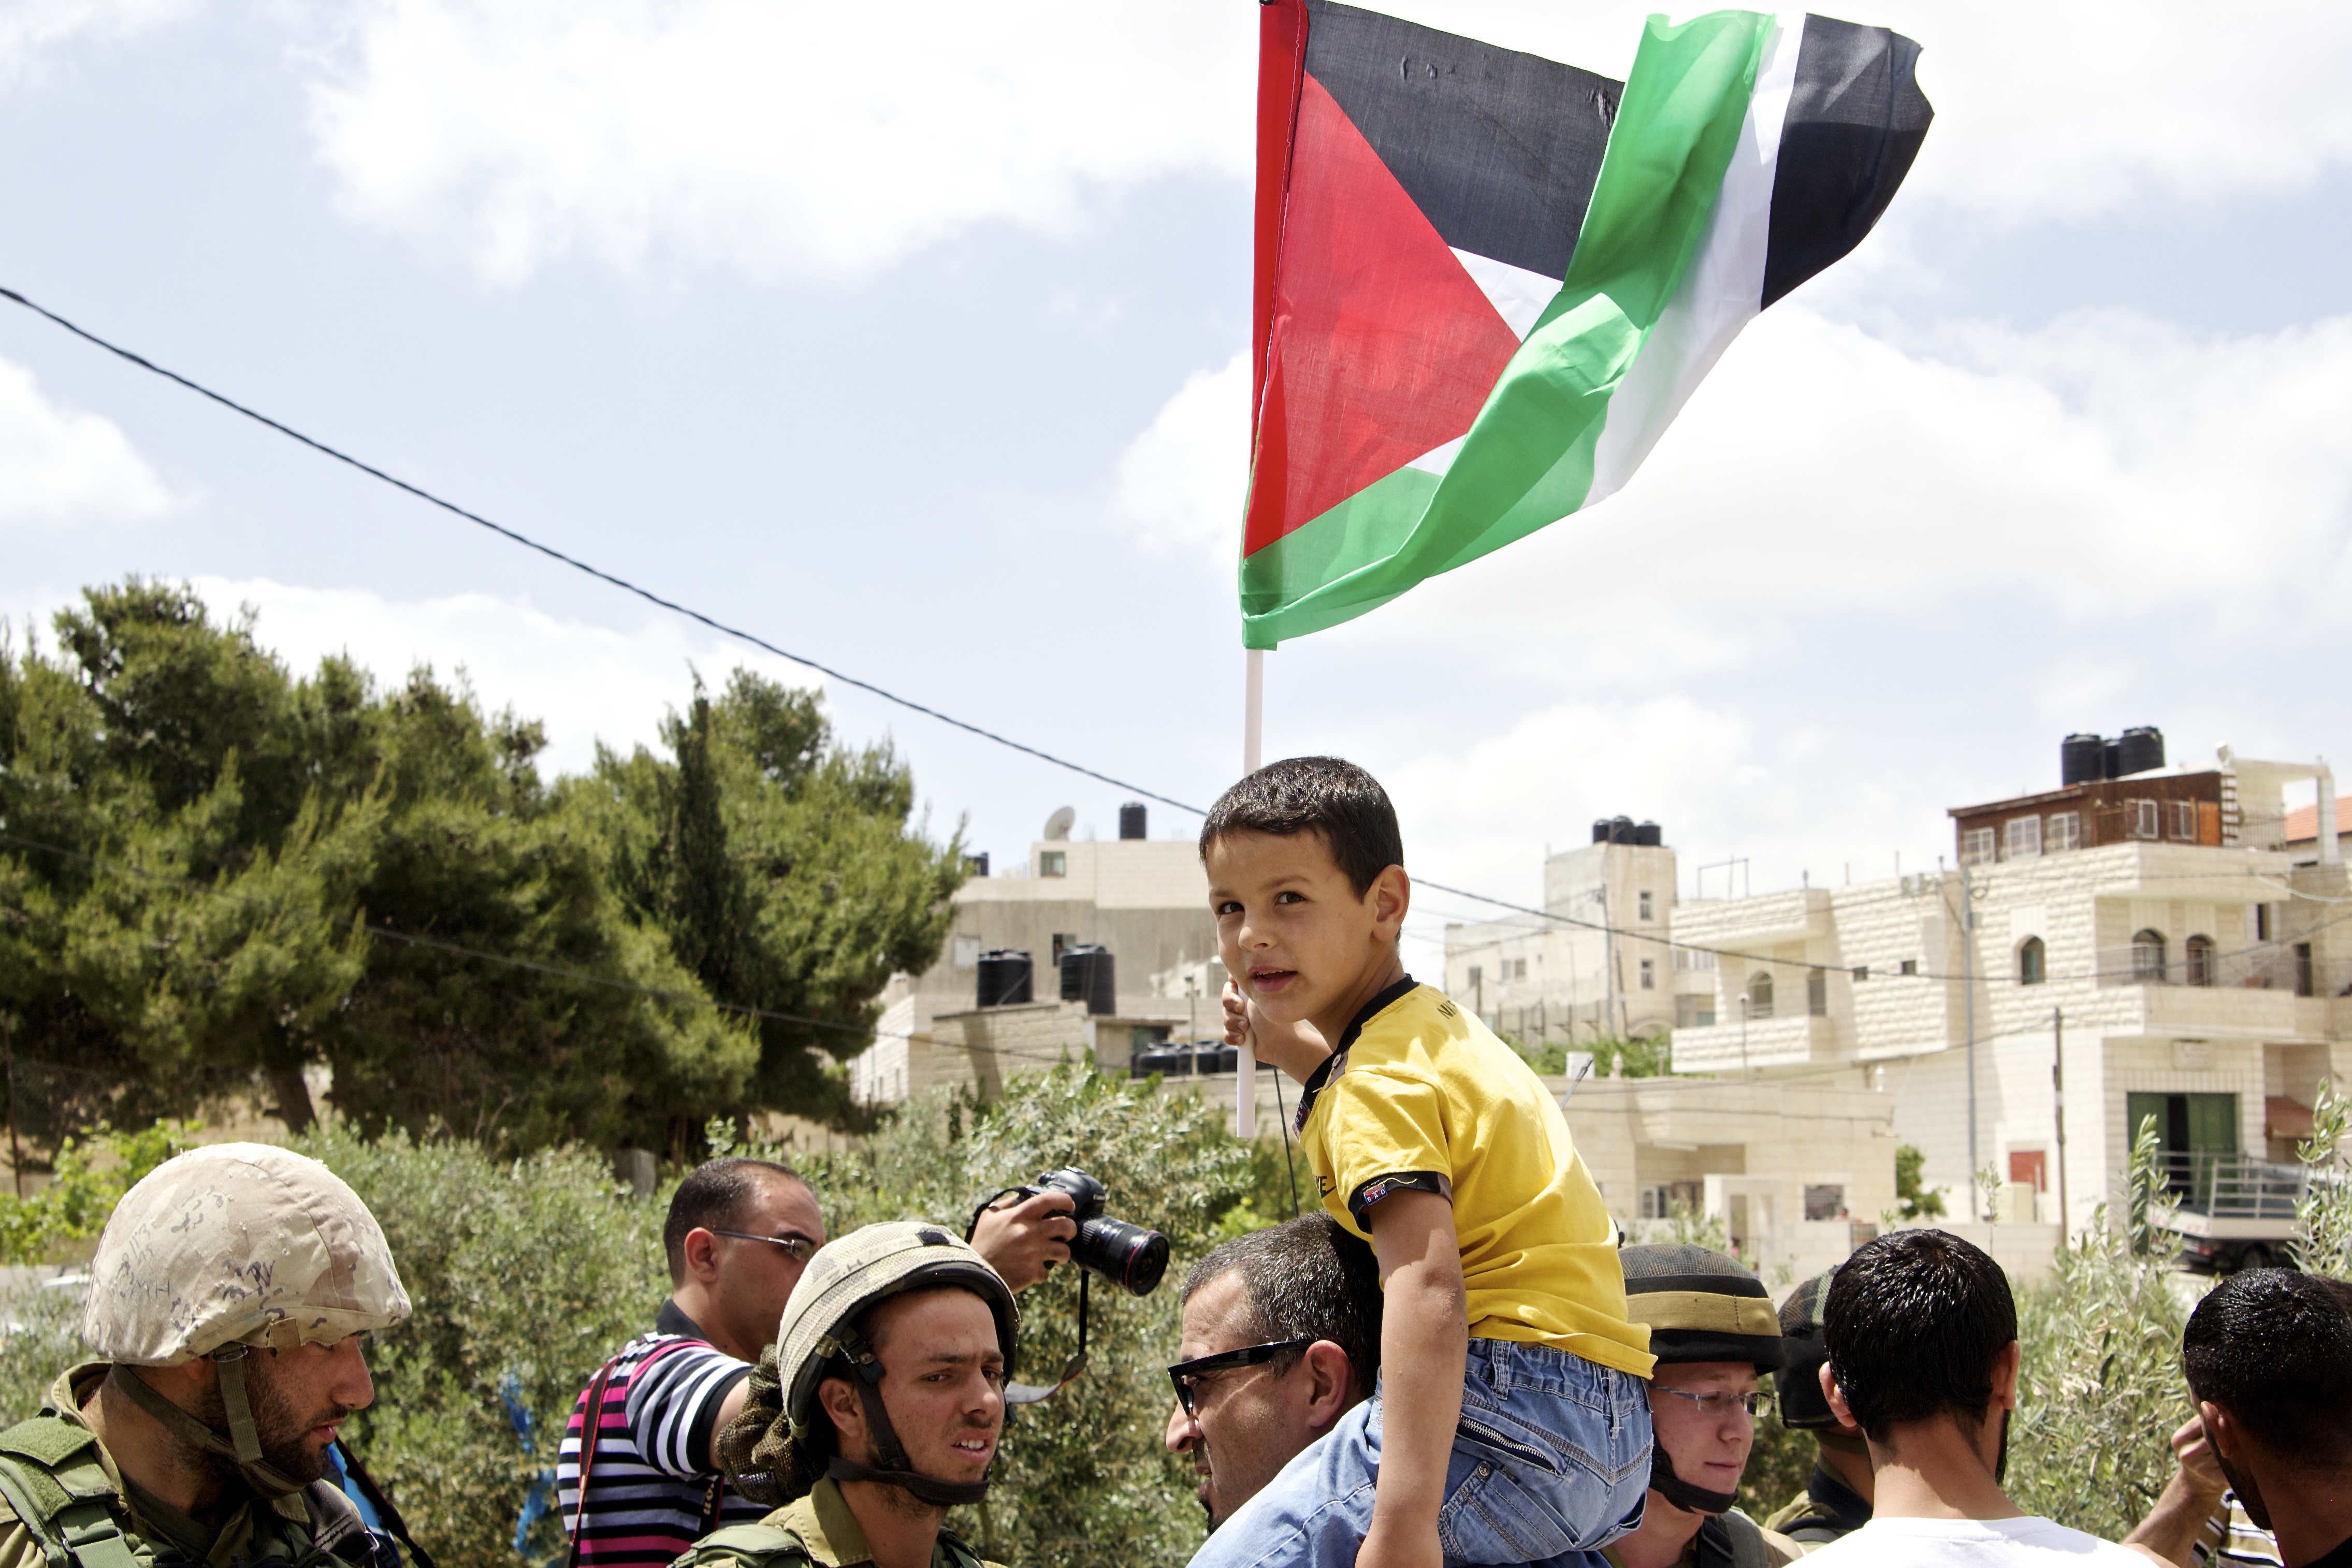 Fighting for a voice: Palestinian survival under Israeli oppression